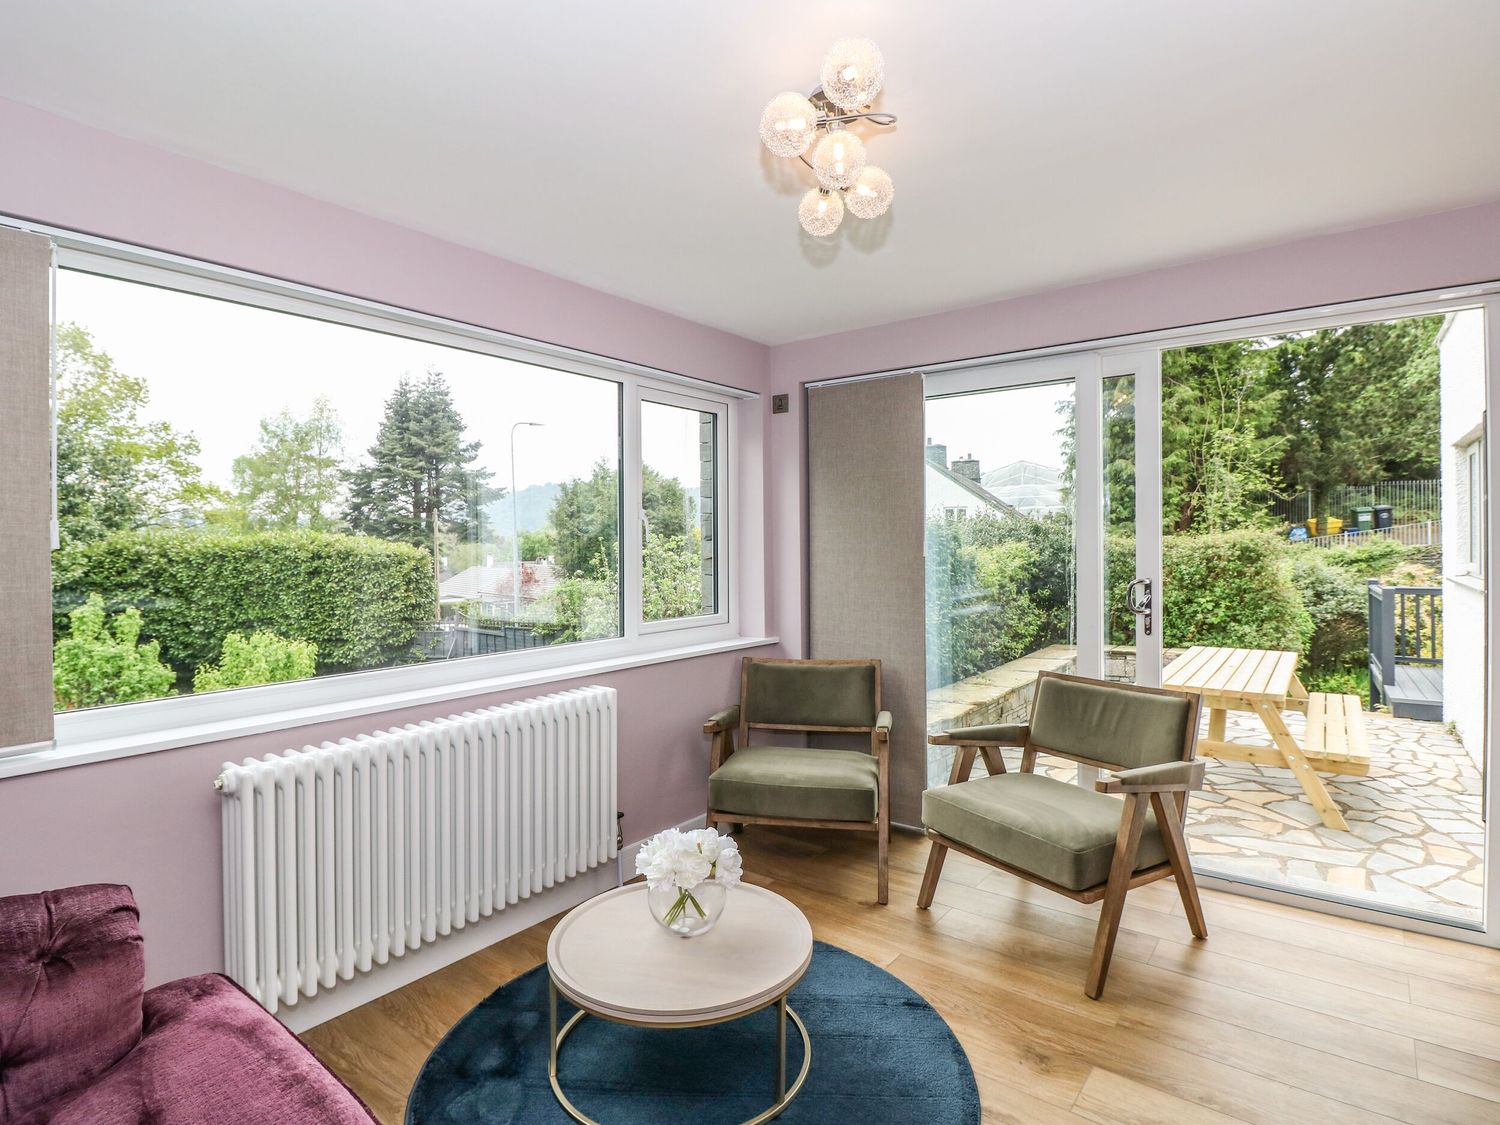 Briars Lea, Bowness-On-Windermere in Cumbria. Pet-friendly. WiFi. Hot tub. Views of Lake Windermere.